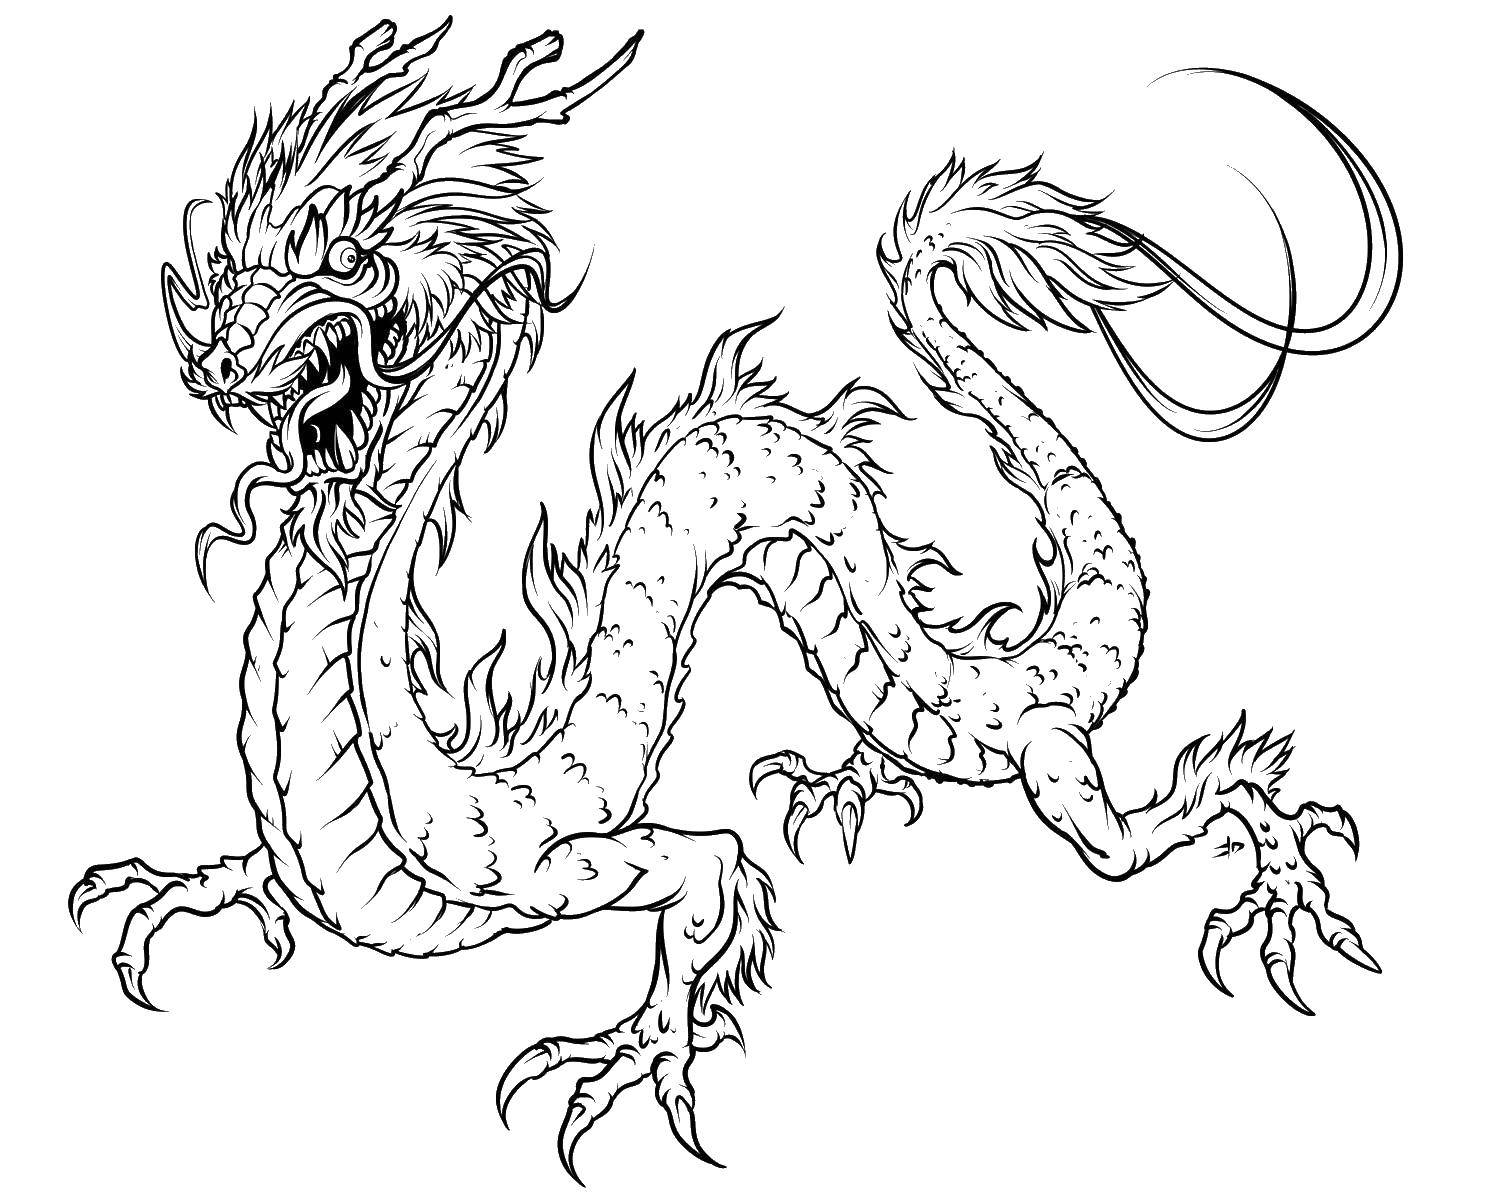 Coloring Chinese dragon. Category Dragons. Tags:  the dragon.